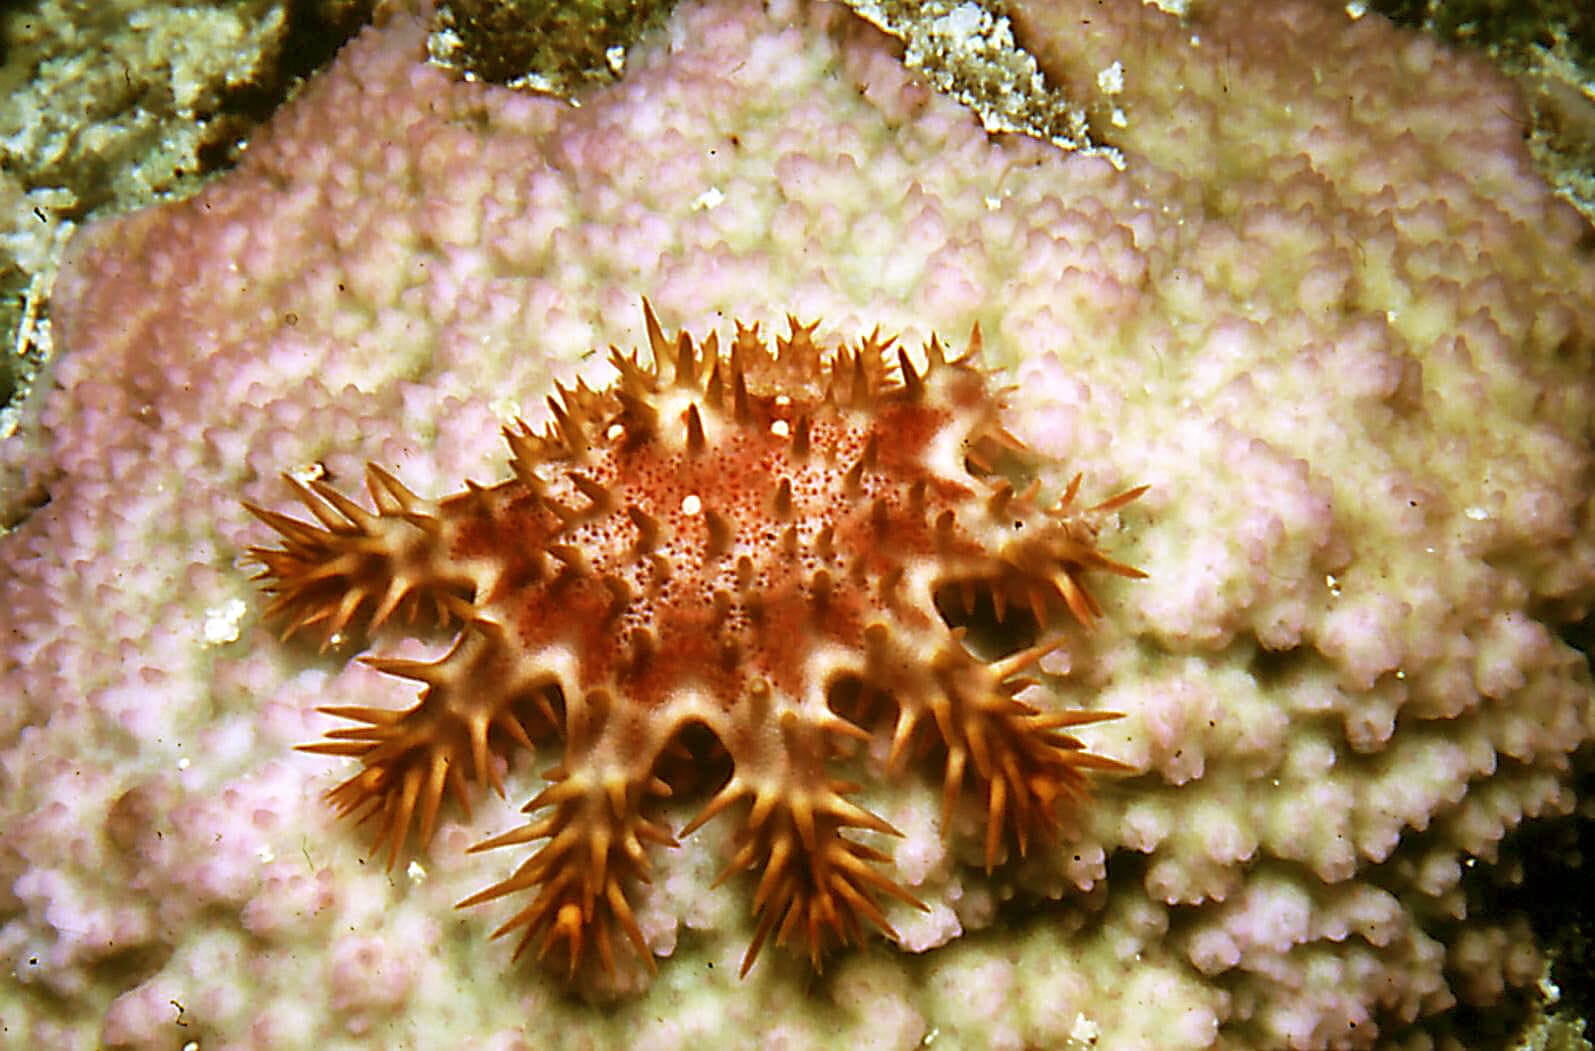 https://en.wikipedia.org/wiki/Crown-of-thorns_starfish#/media/File:Early_coral-feeding_COTS.JPG